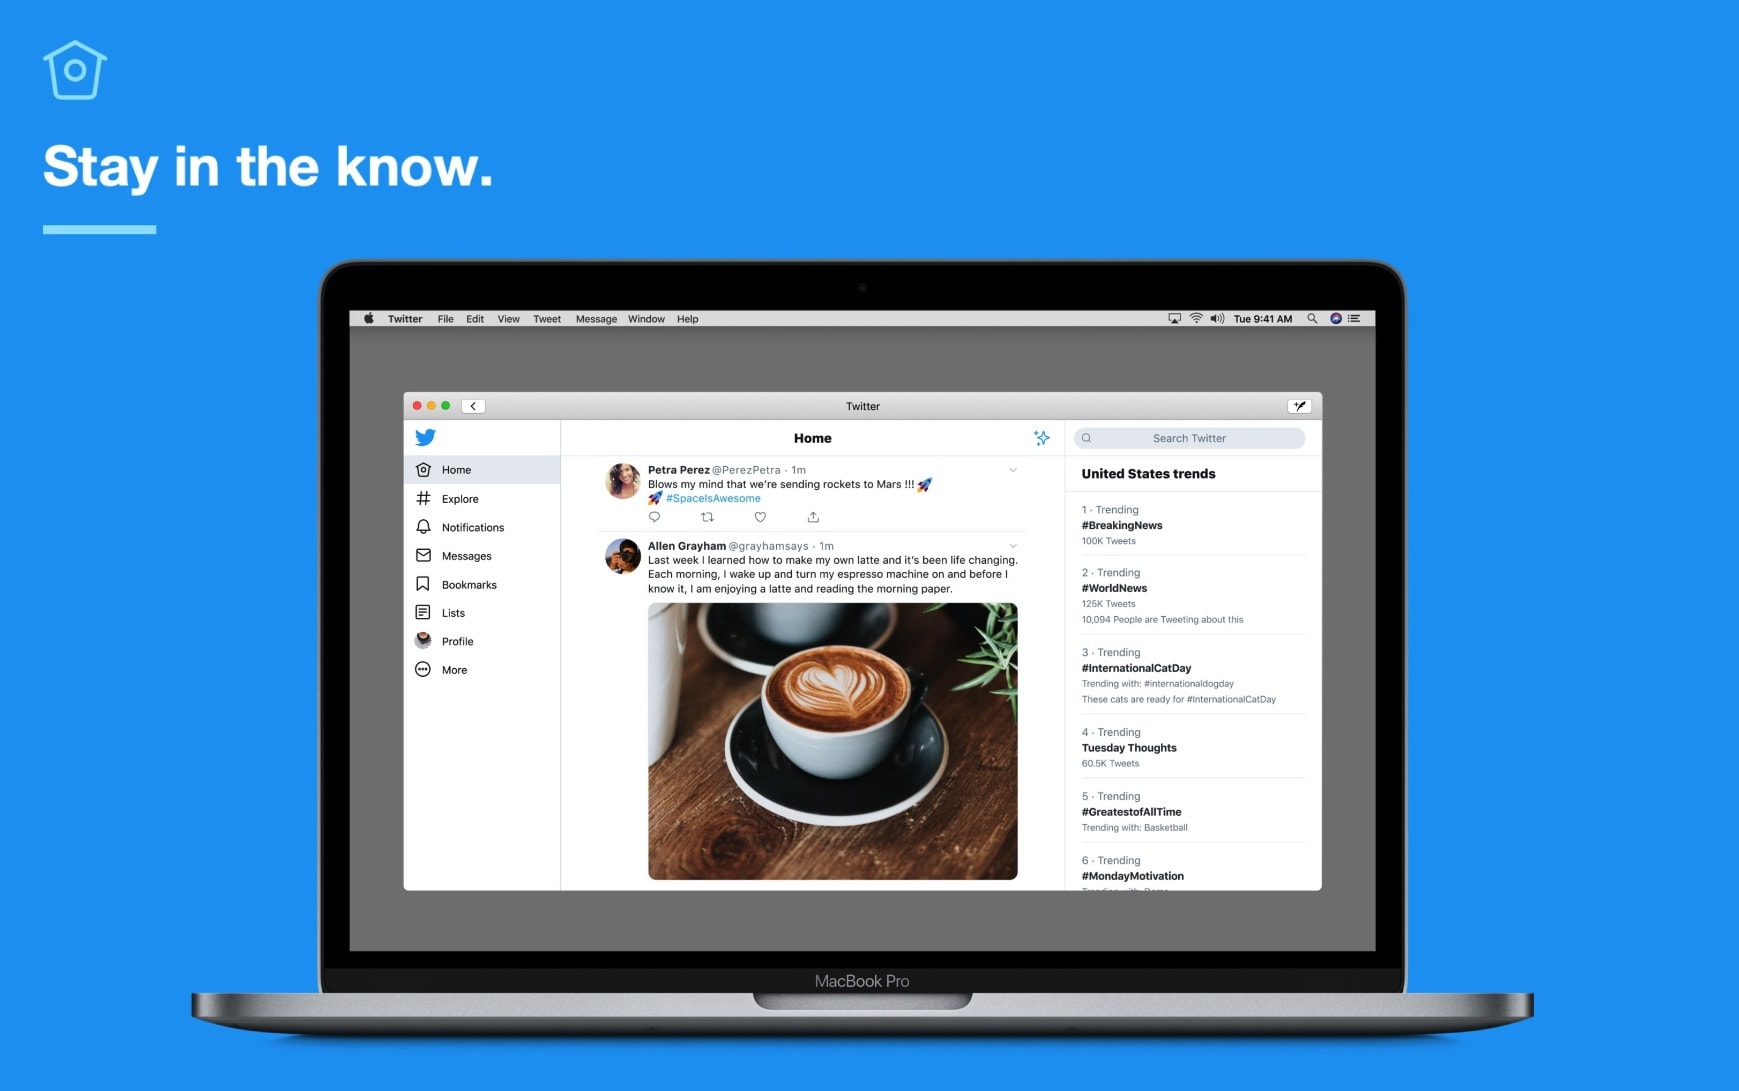 Twitter makes it triumphant return to macOS with new Mac app